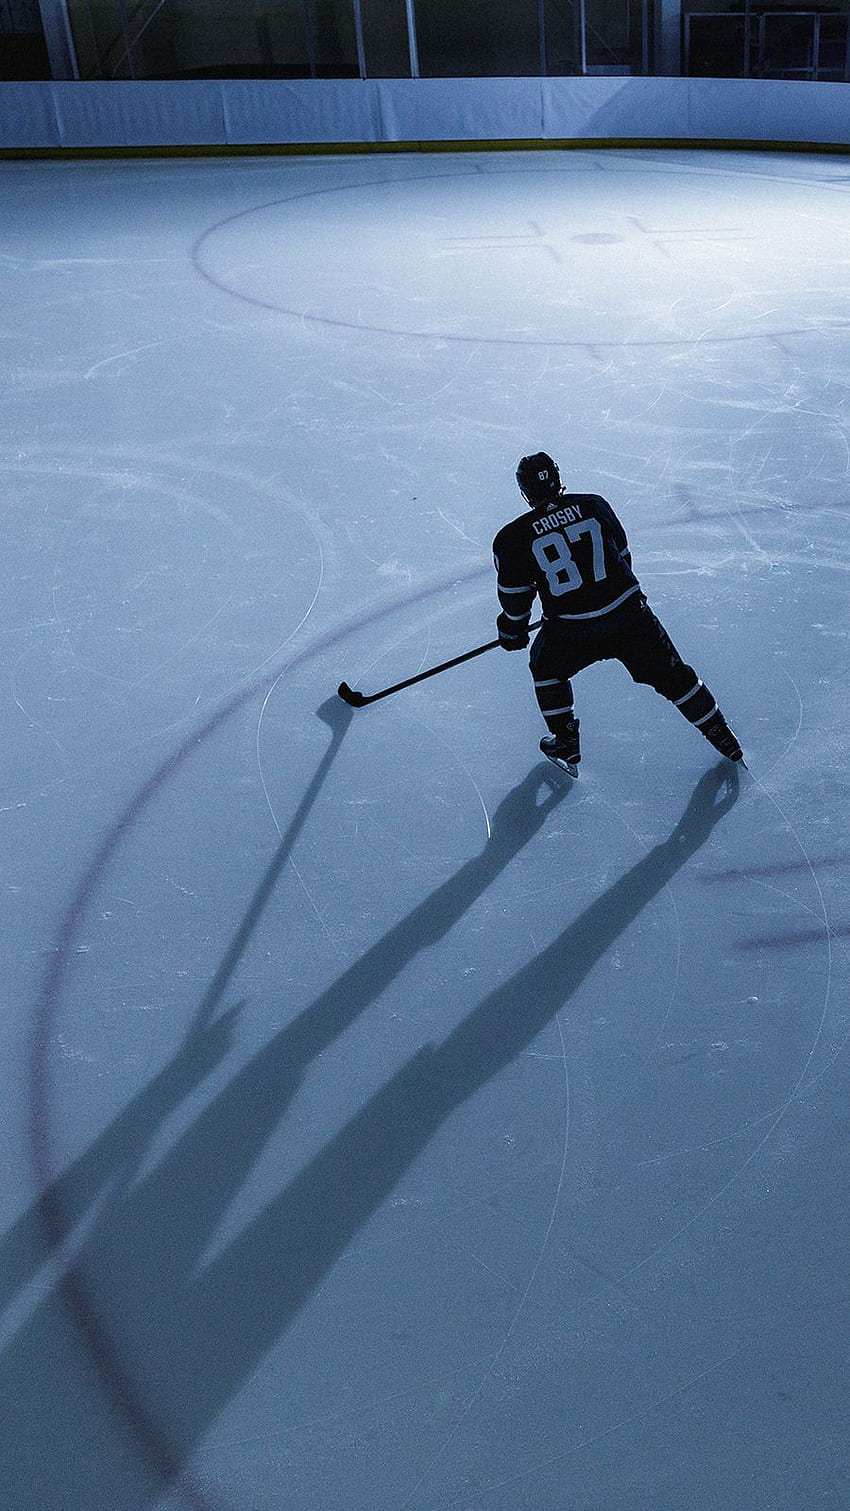 Hockey Player Hitting The Puck In A Dark Snowy Atmosphere Background, Cool  Hockey Pictures Background Image And Wallpaper for Free Download